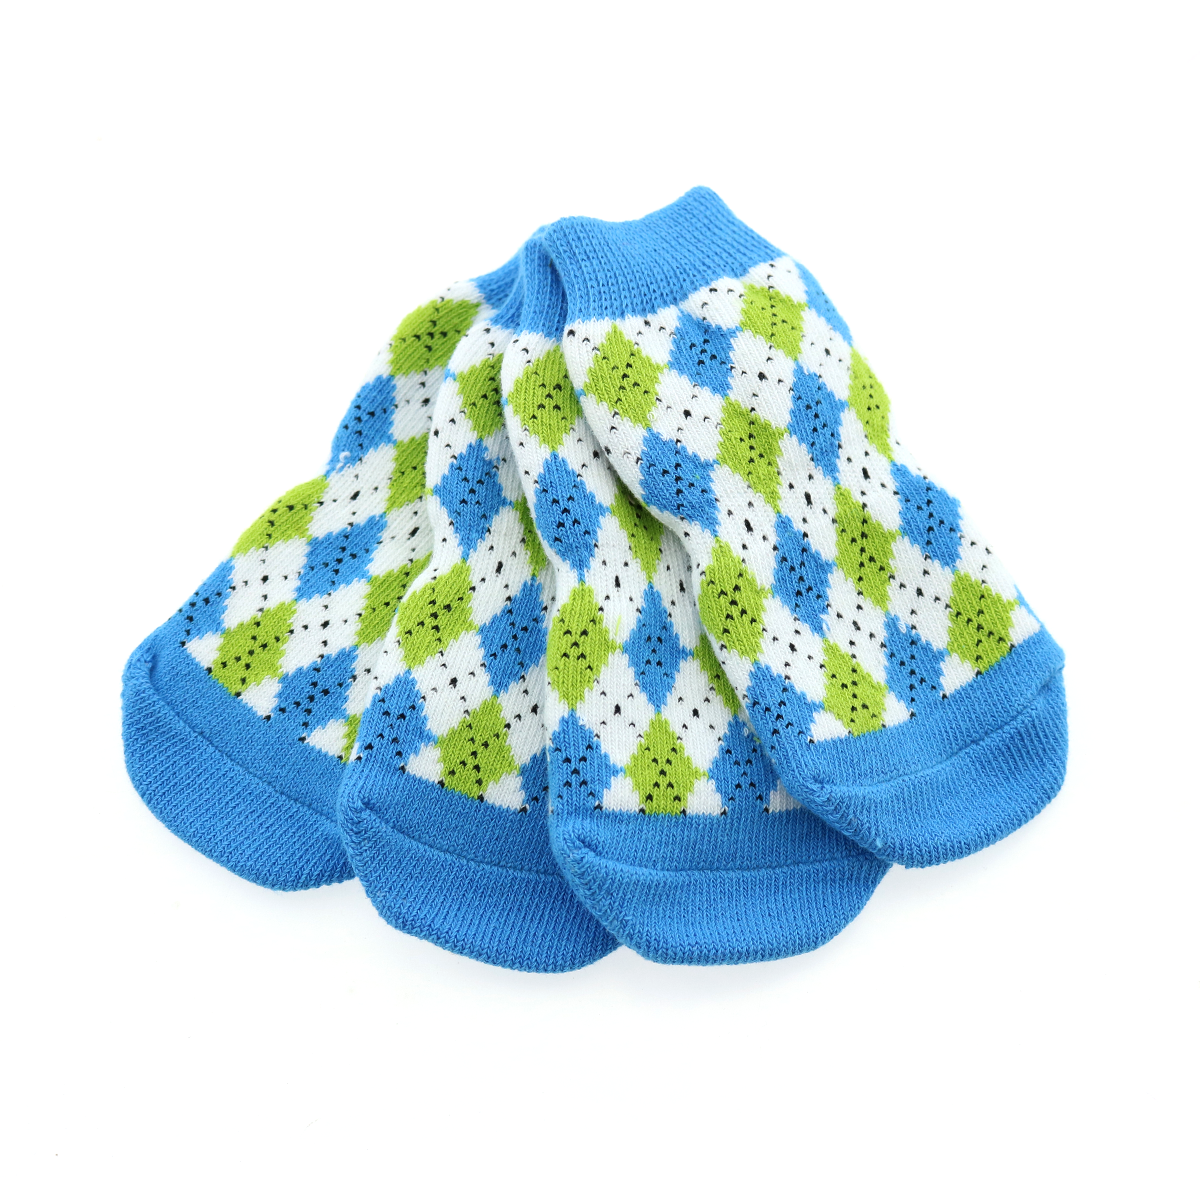 Non-Skid Dog Socks by Doggie Design - Blue and Green Argyle